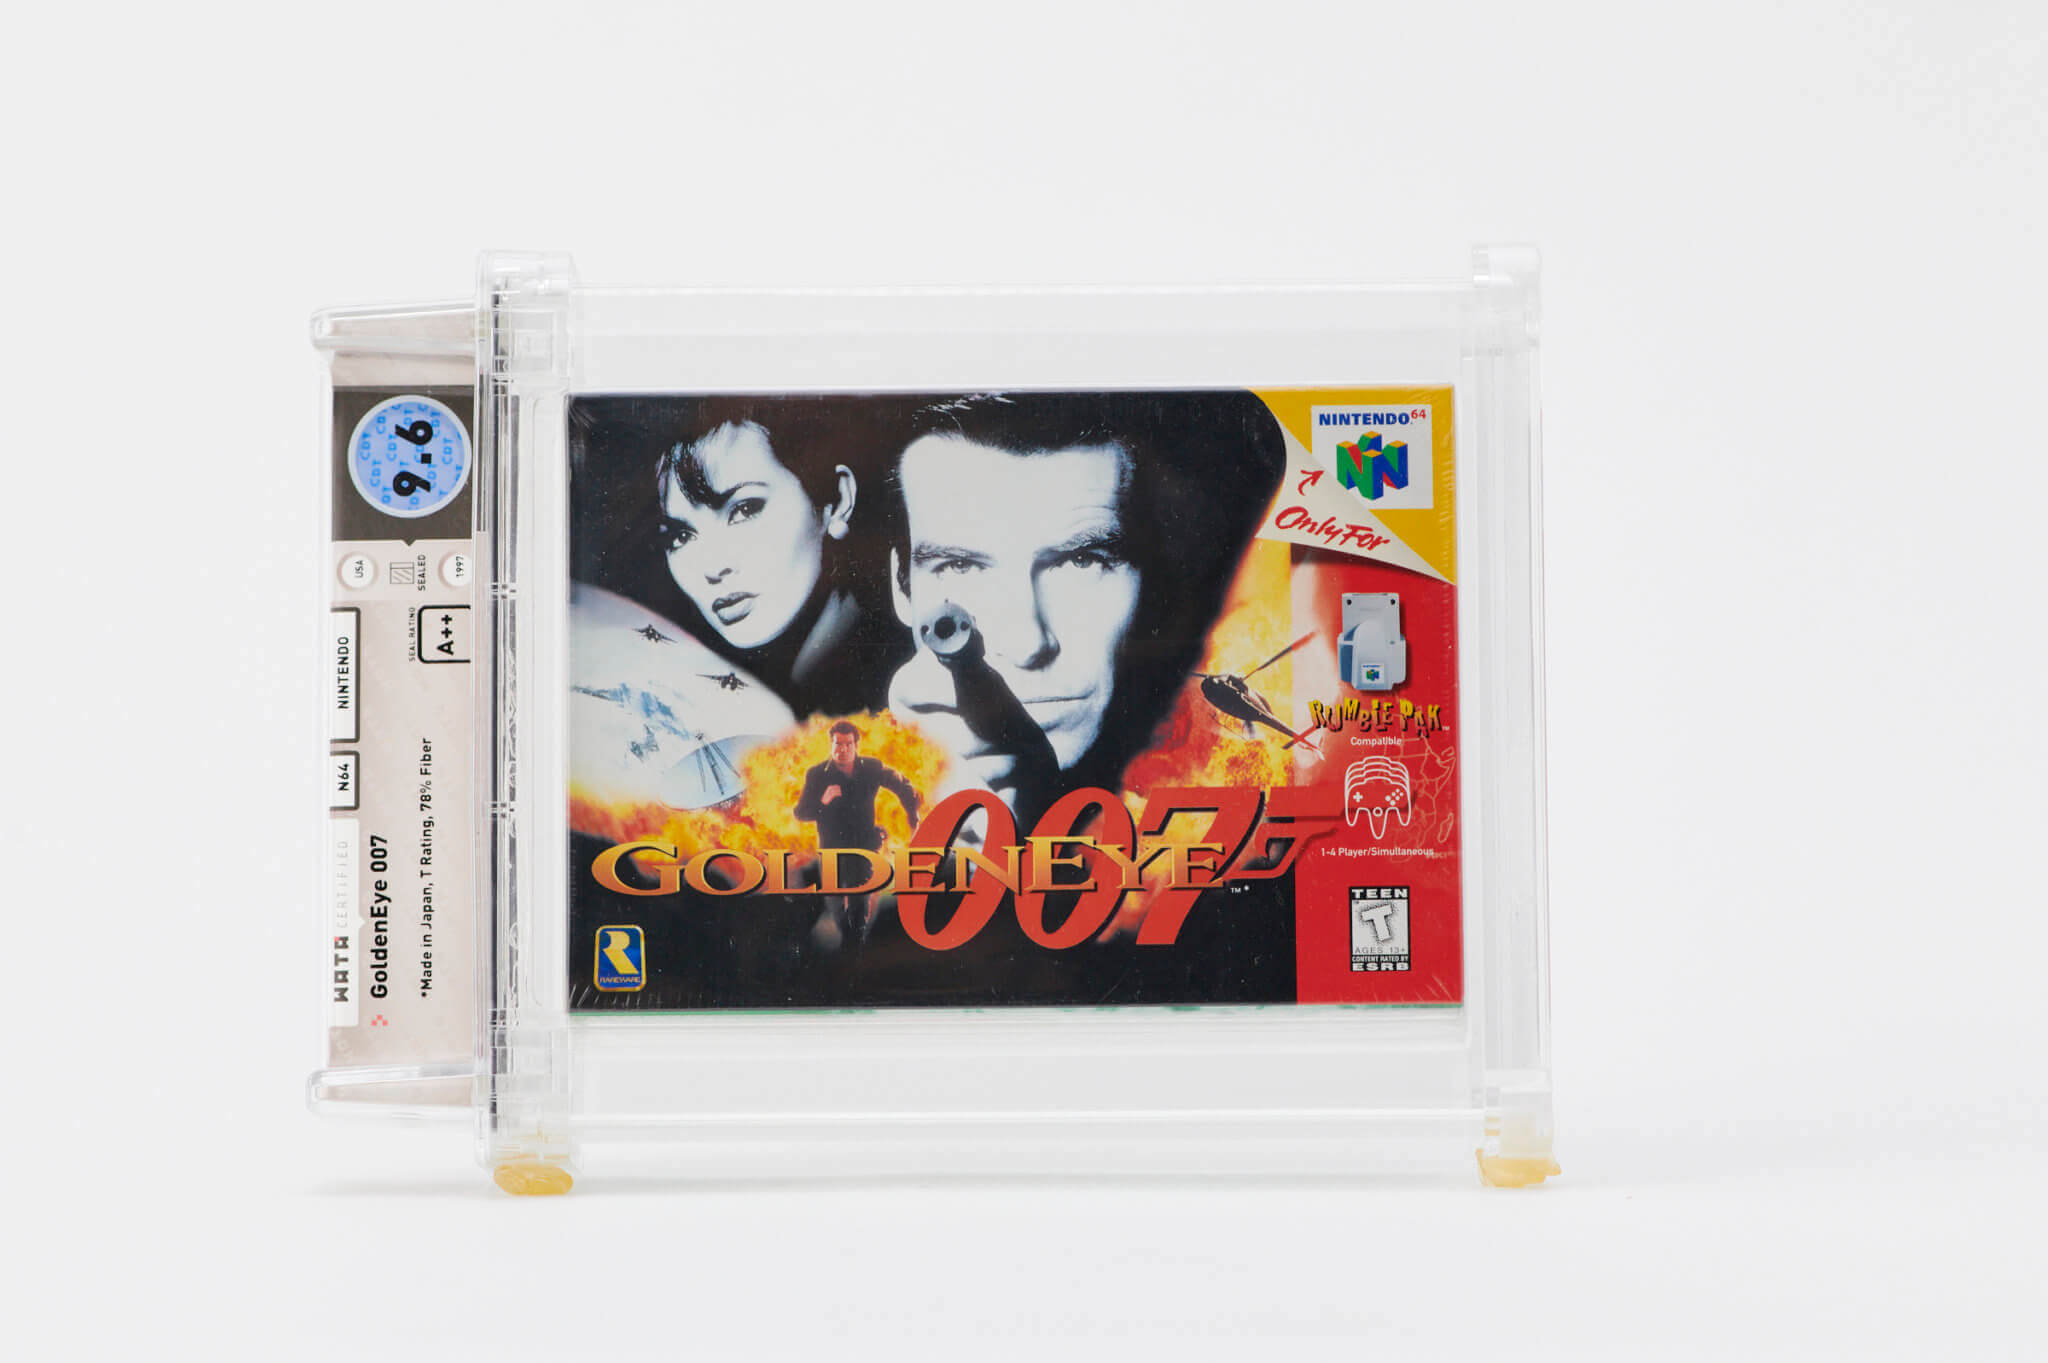 What Did Reviewers Think of N64’s GoldenEye 007 in 1997?